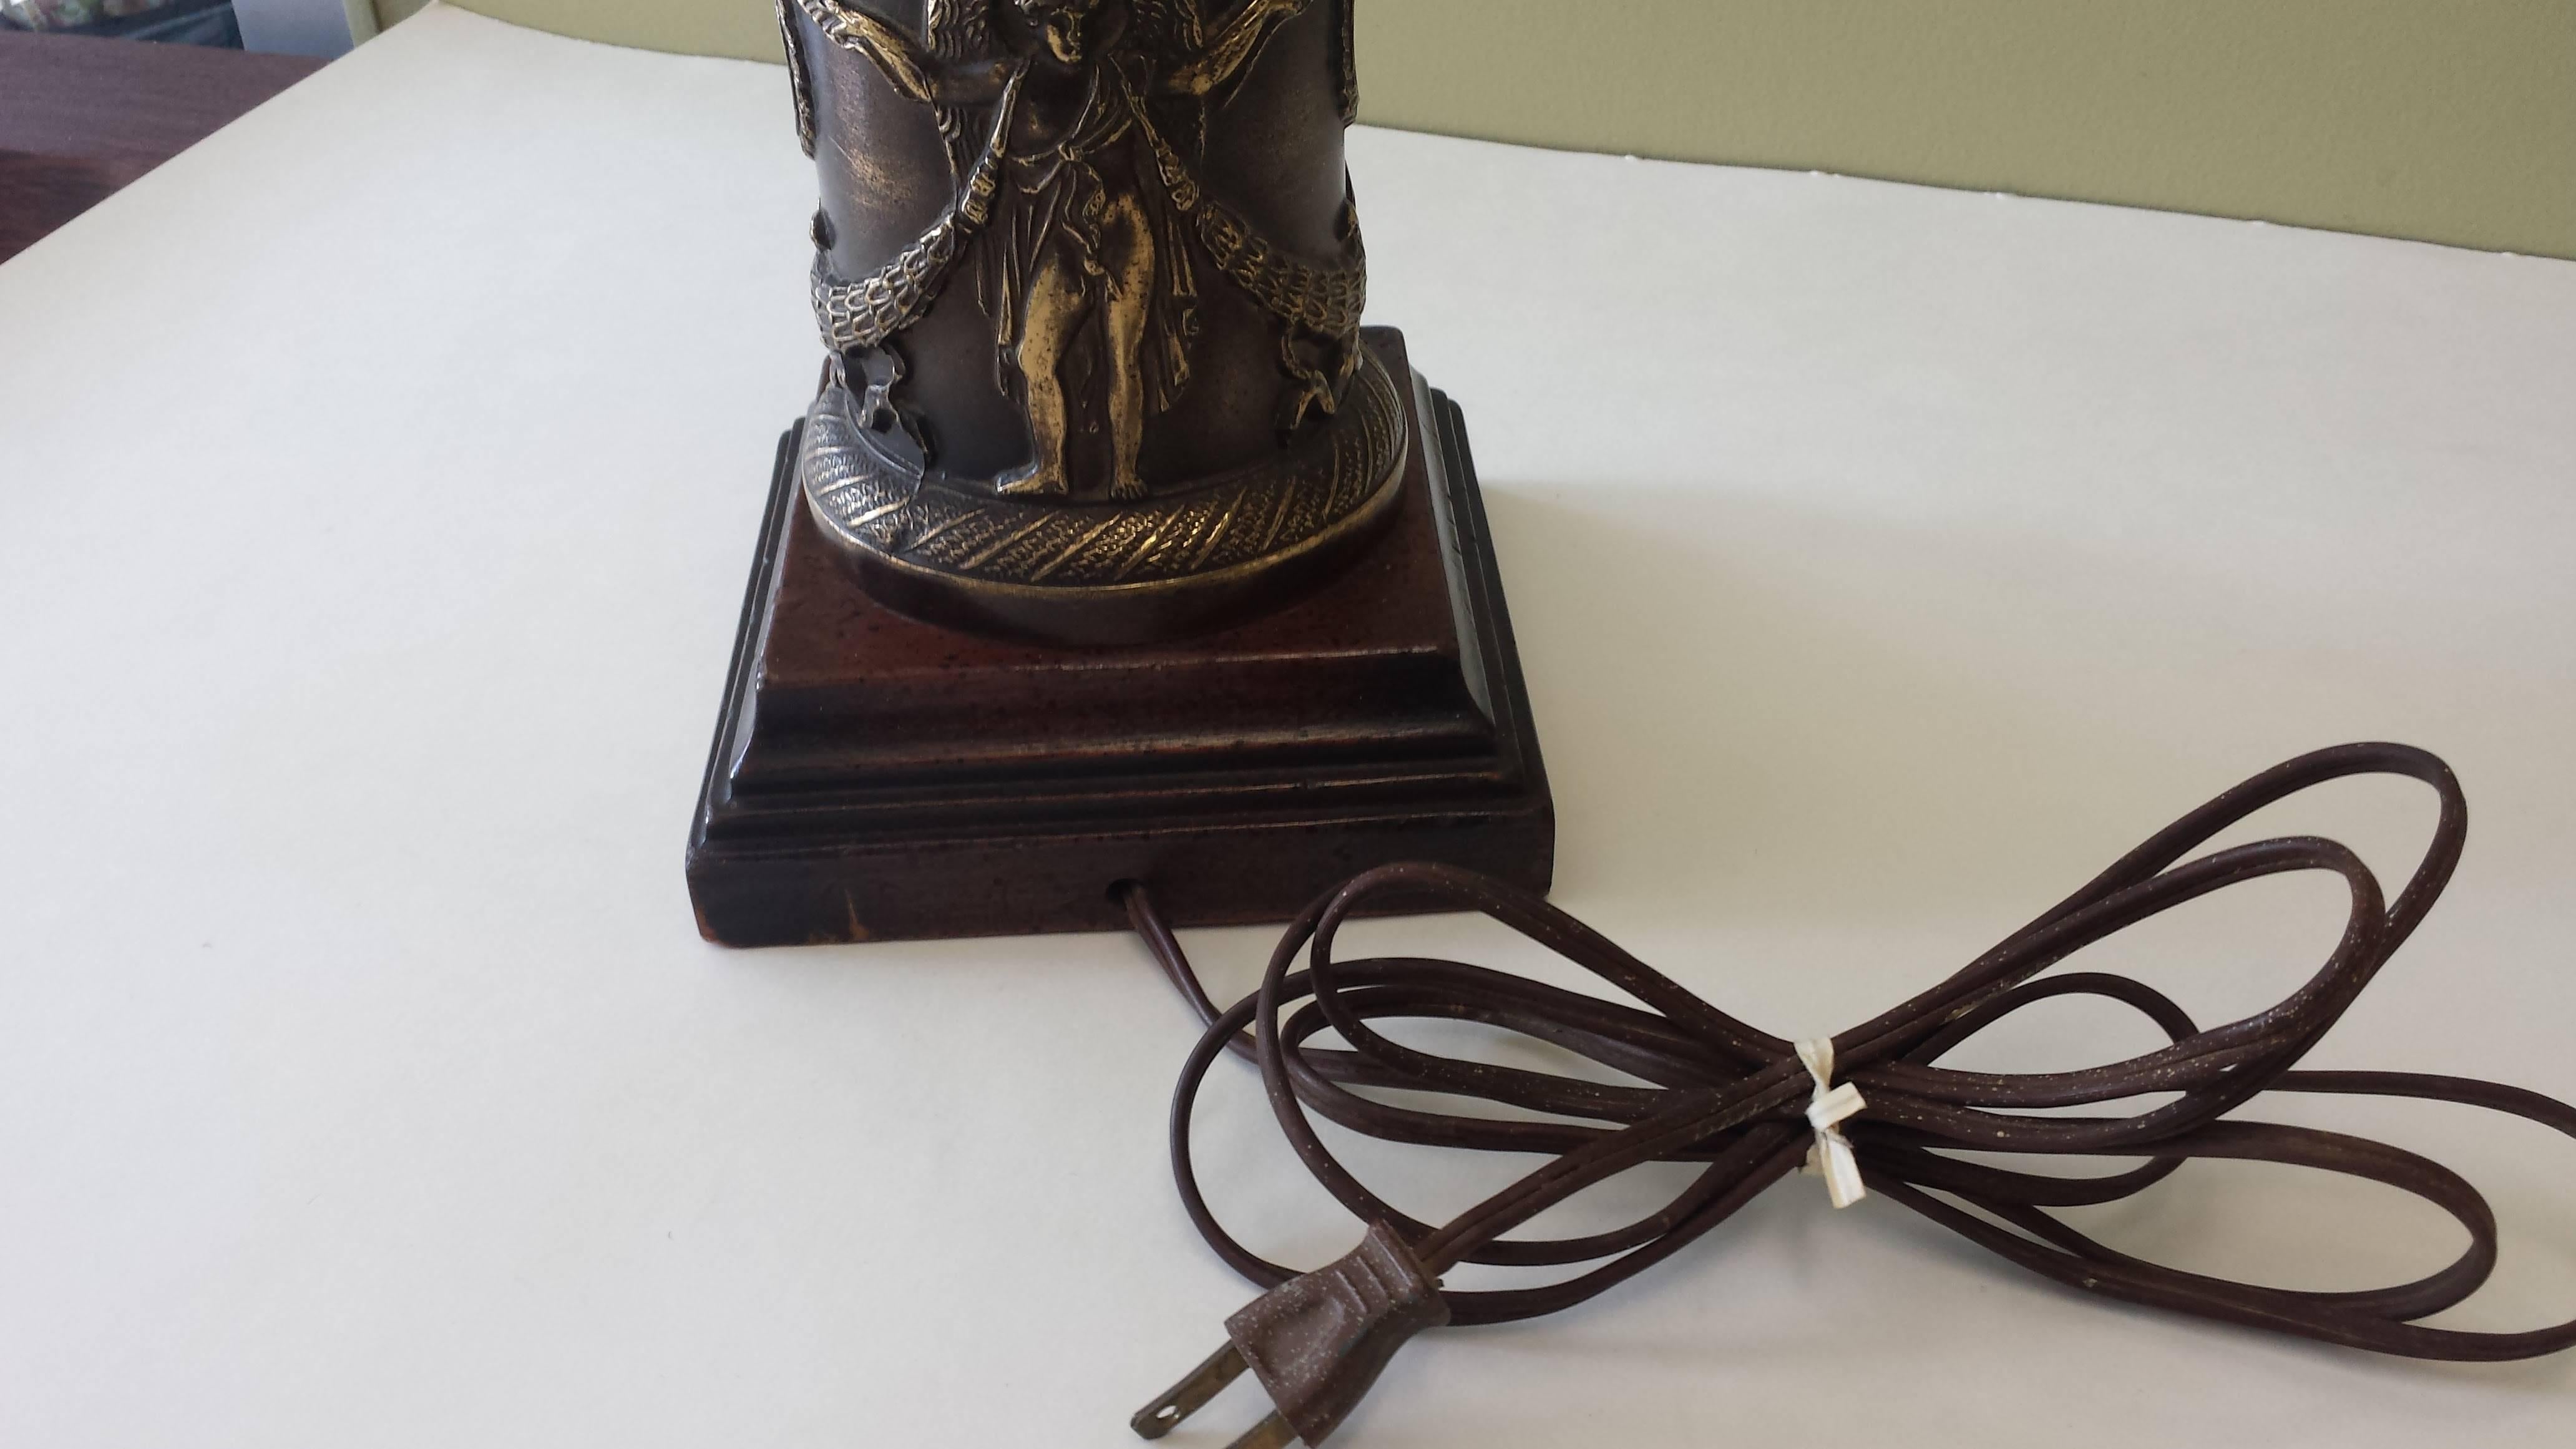 20th Century Frederick Cooper Neoclassical Table Lamp, Wood and Bronze